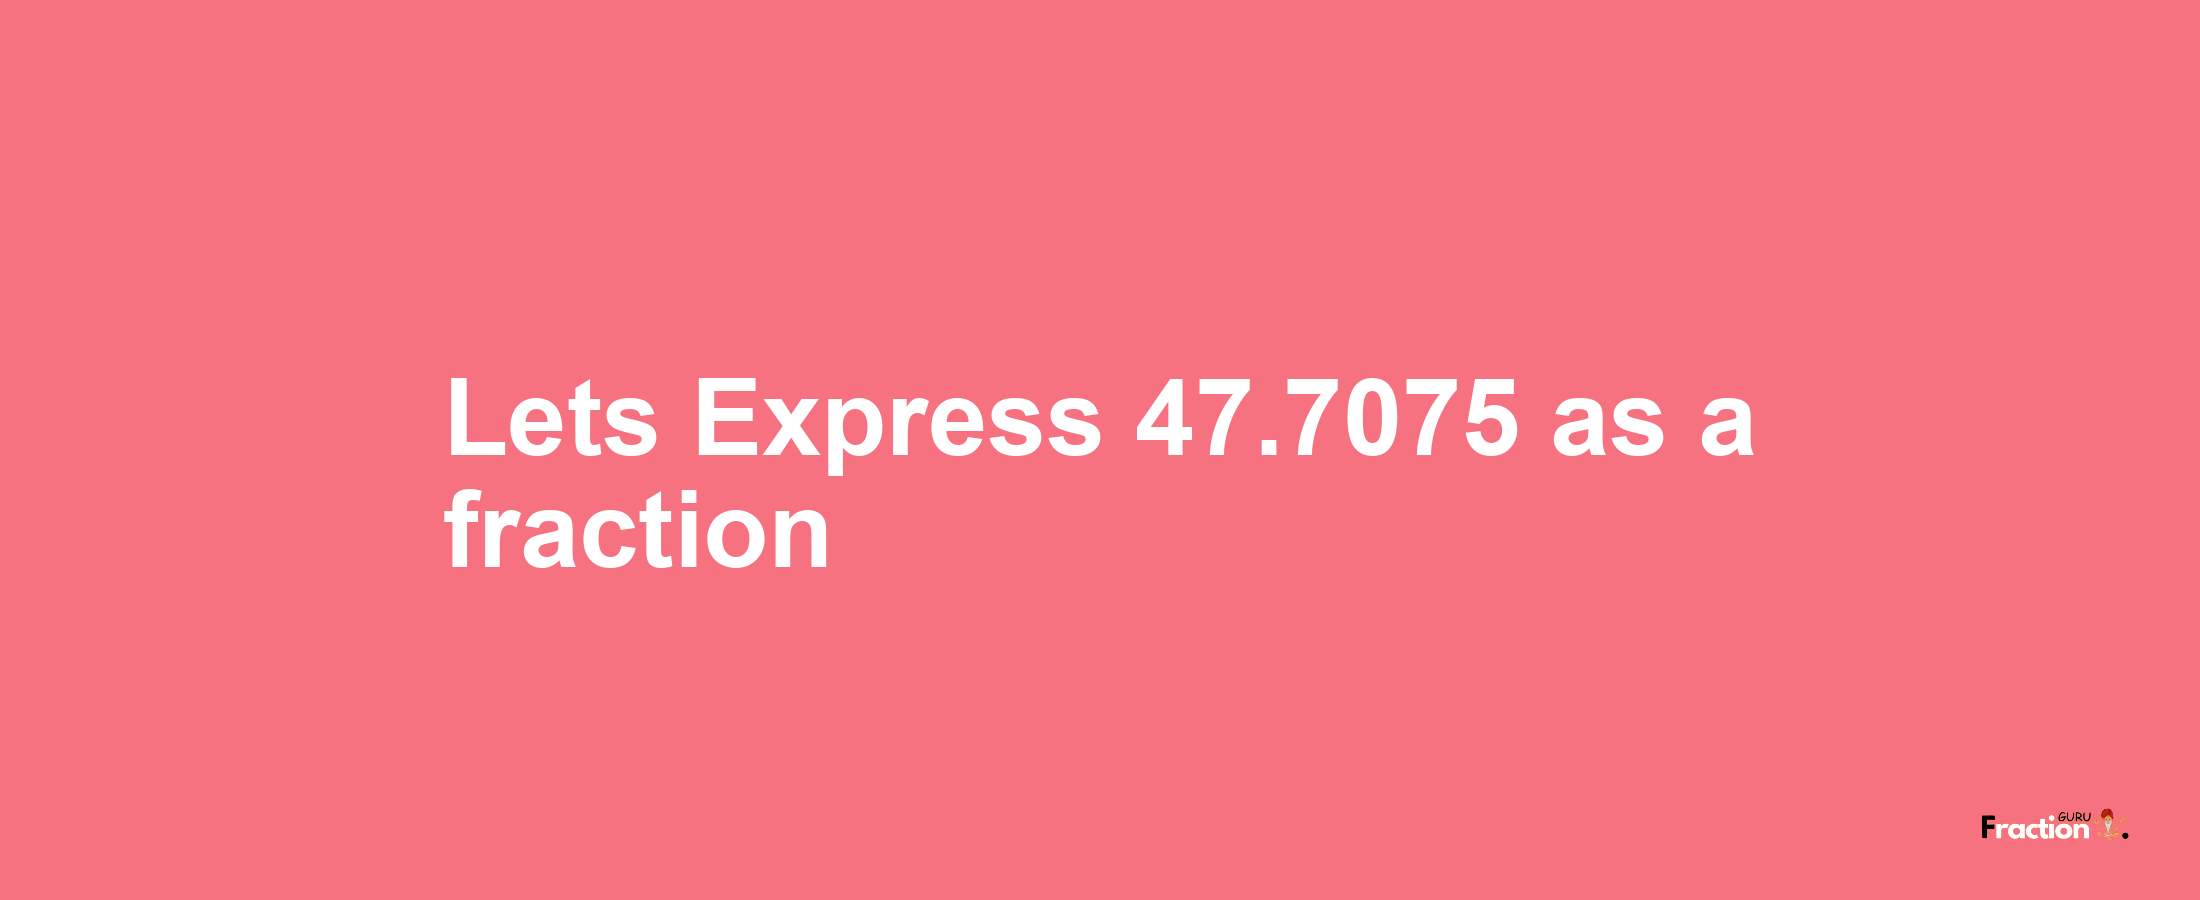 Lets Express 47.7075 as afraction